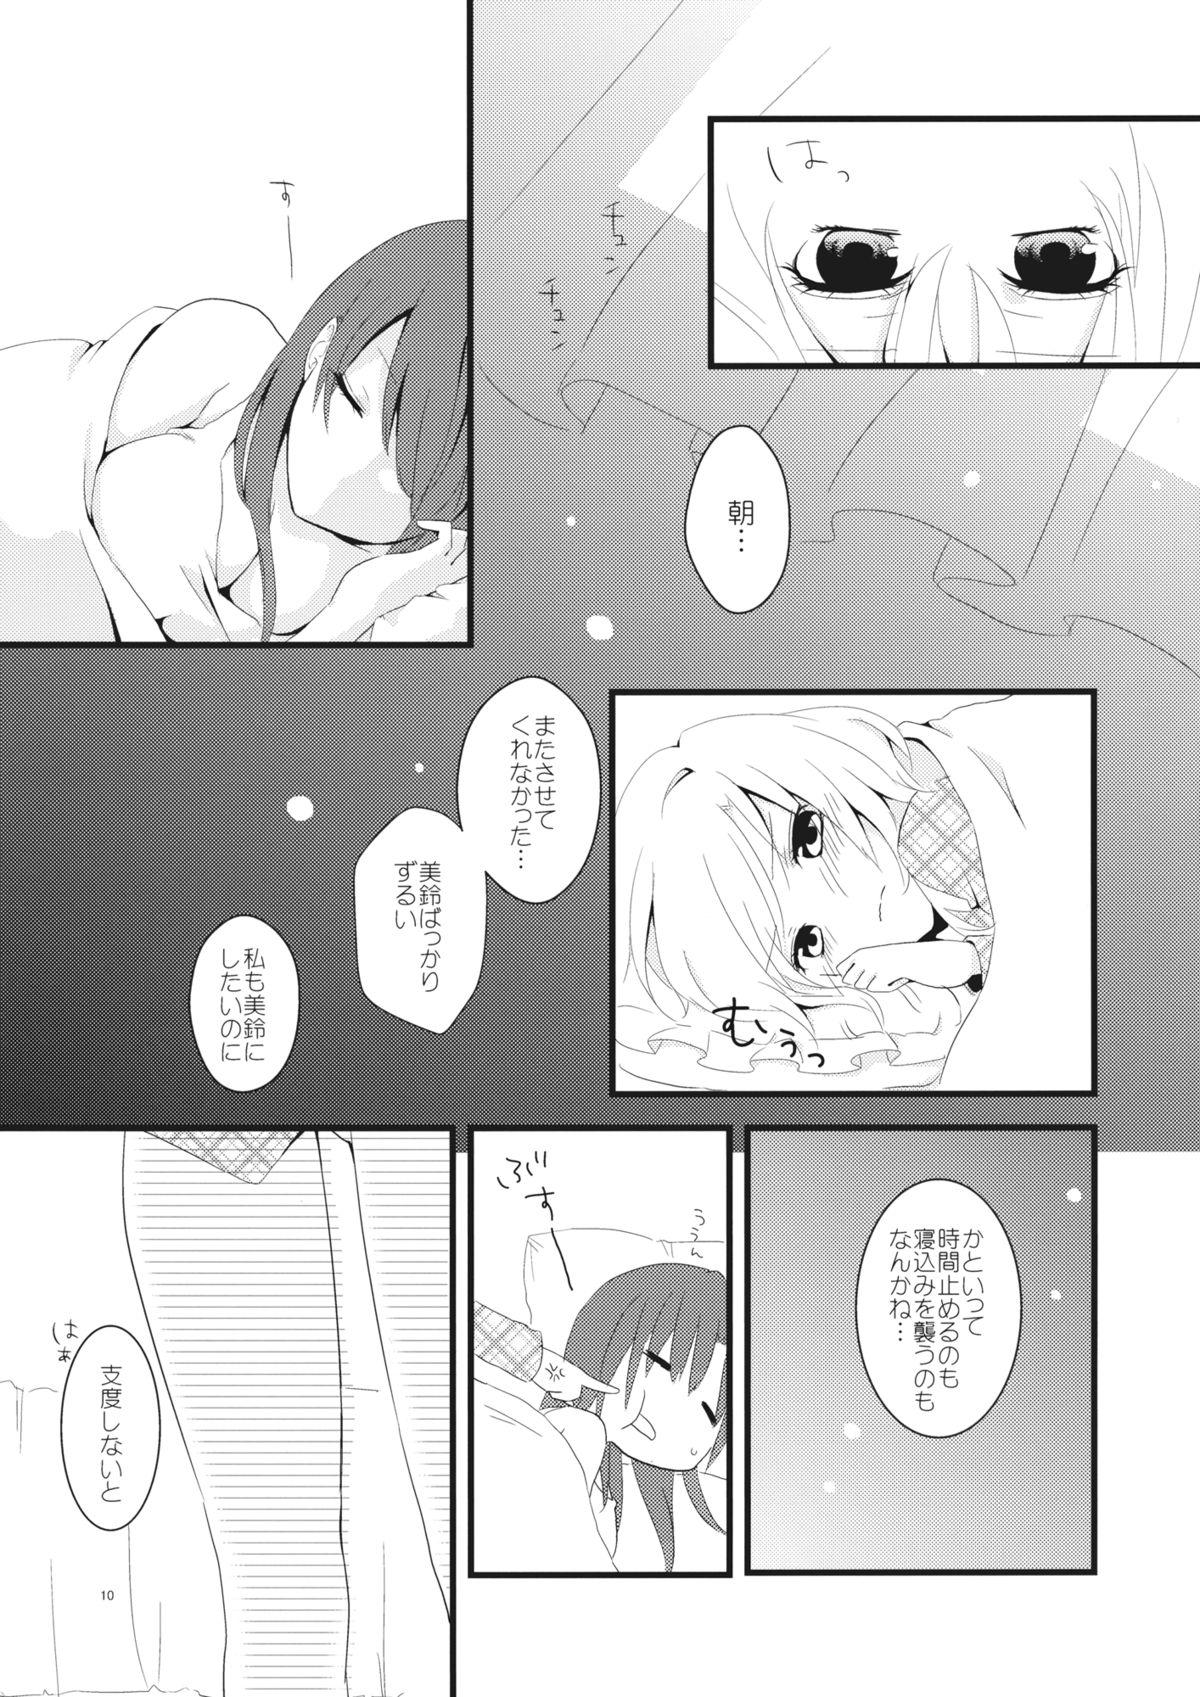 Porno 18 marshmallow heart - Touhou project Couple - Page 9